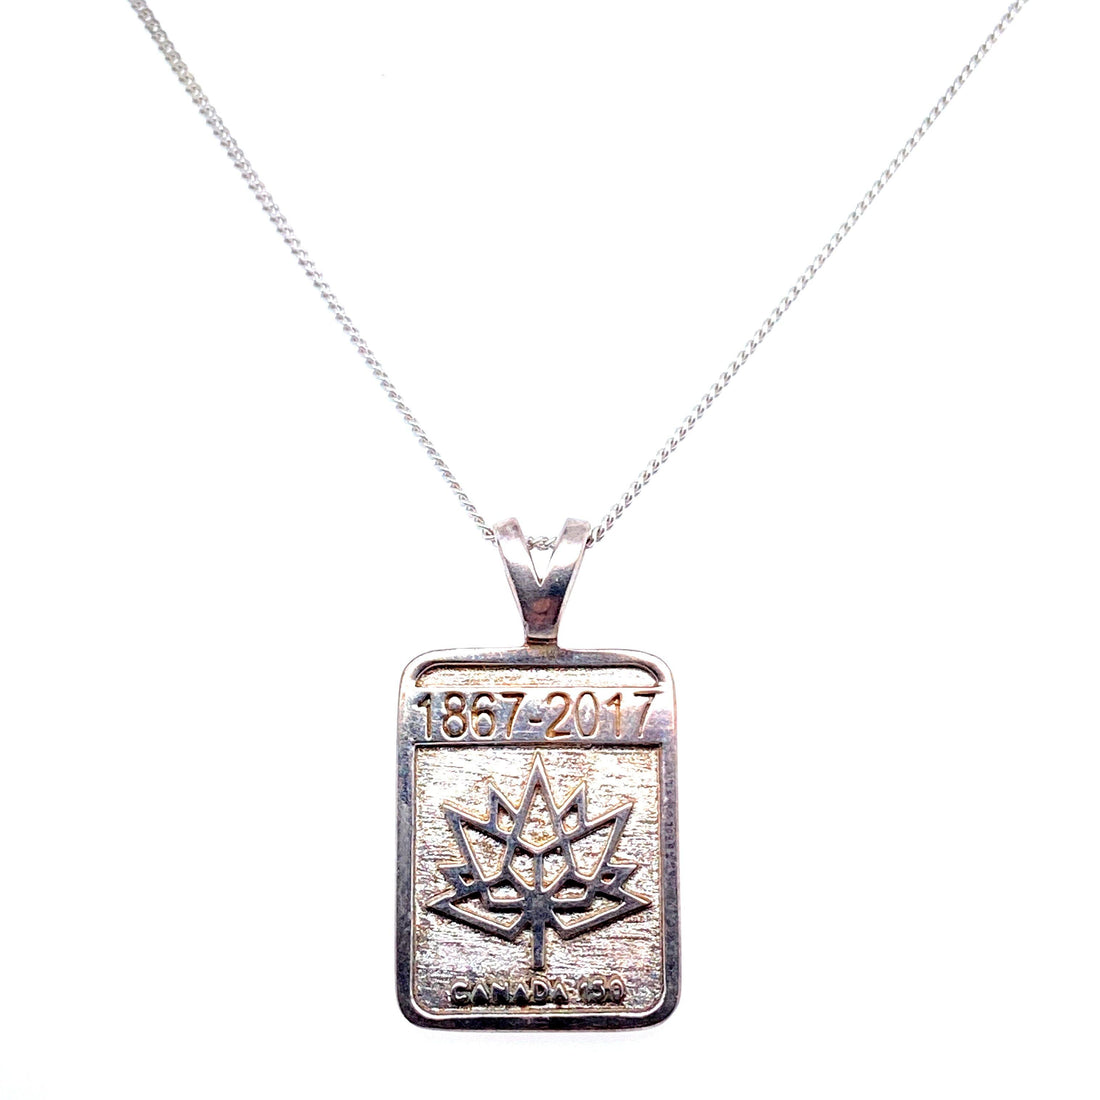 SILVER CANADA NECKLACE - Appelt&